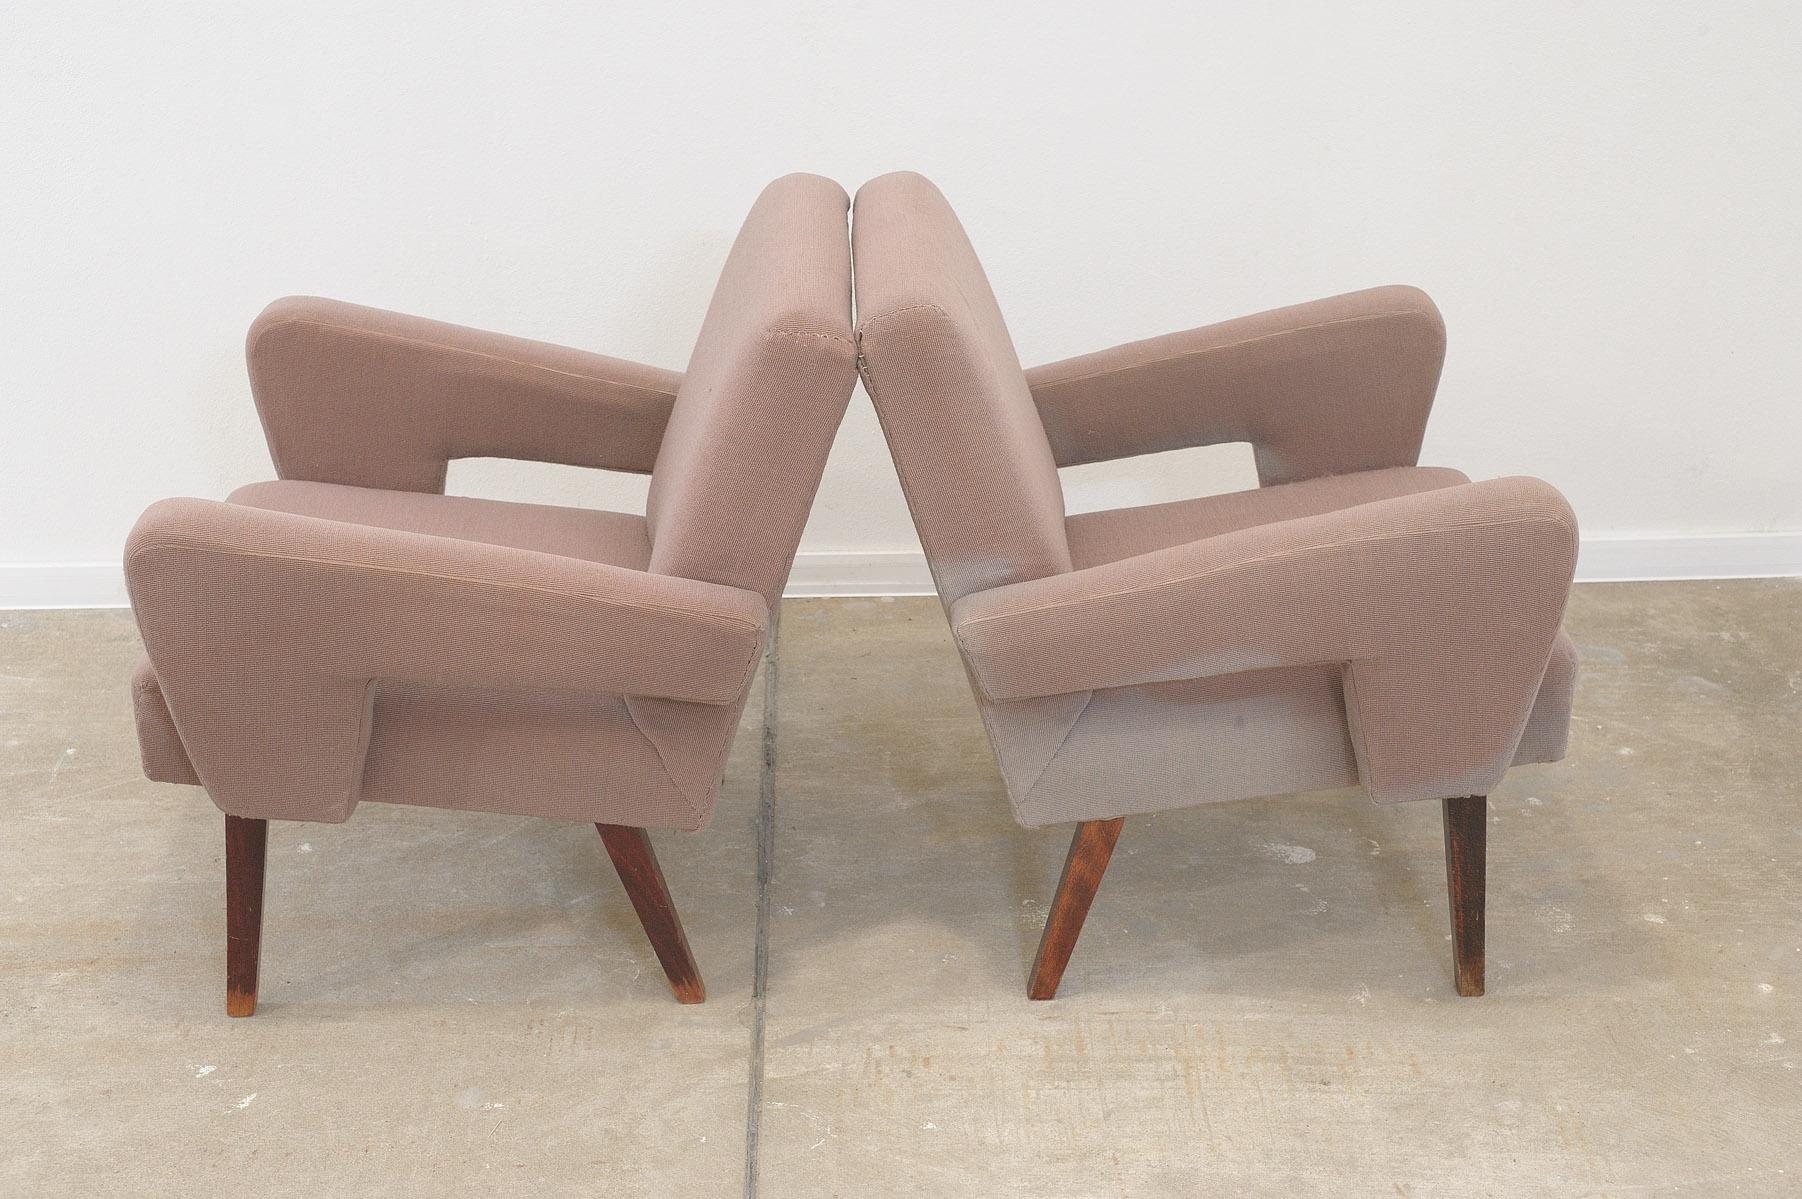 A pair of midcentury armchairs, made by Jitona company in the former Czechoslovakia in the 1970s.  The chairs are fully functional, have beech wood legs.  They show signs of age and using, the fabric is sun faded on the sides. Price is for the